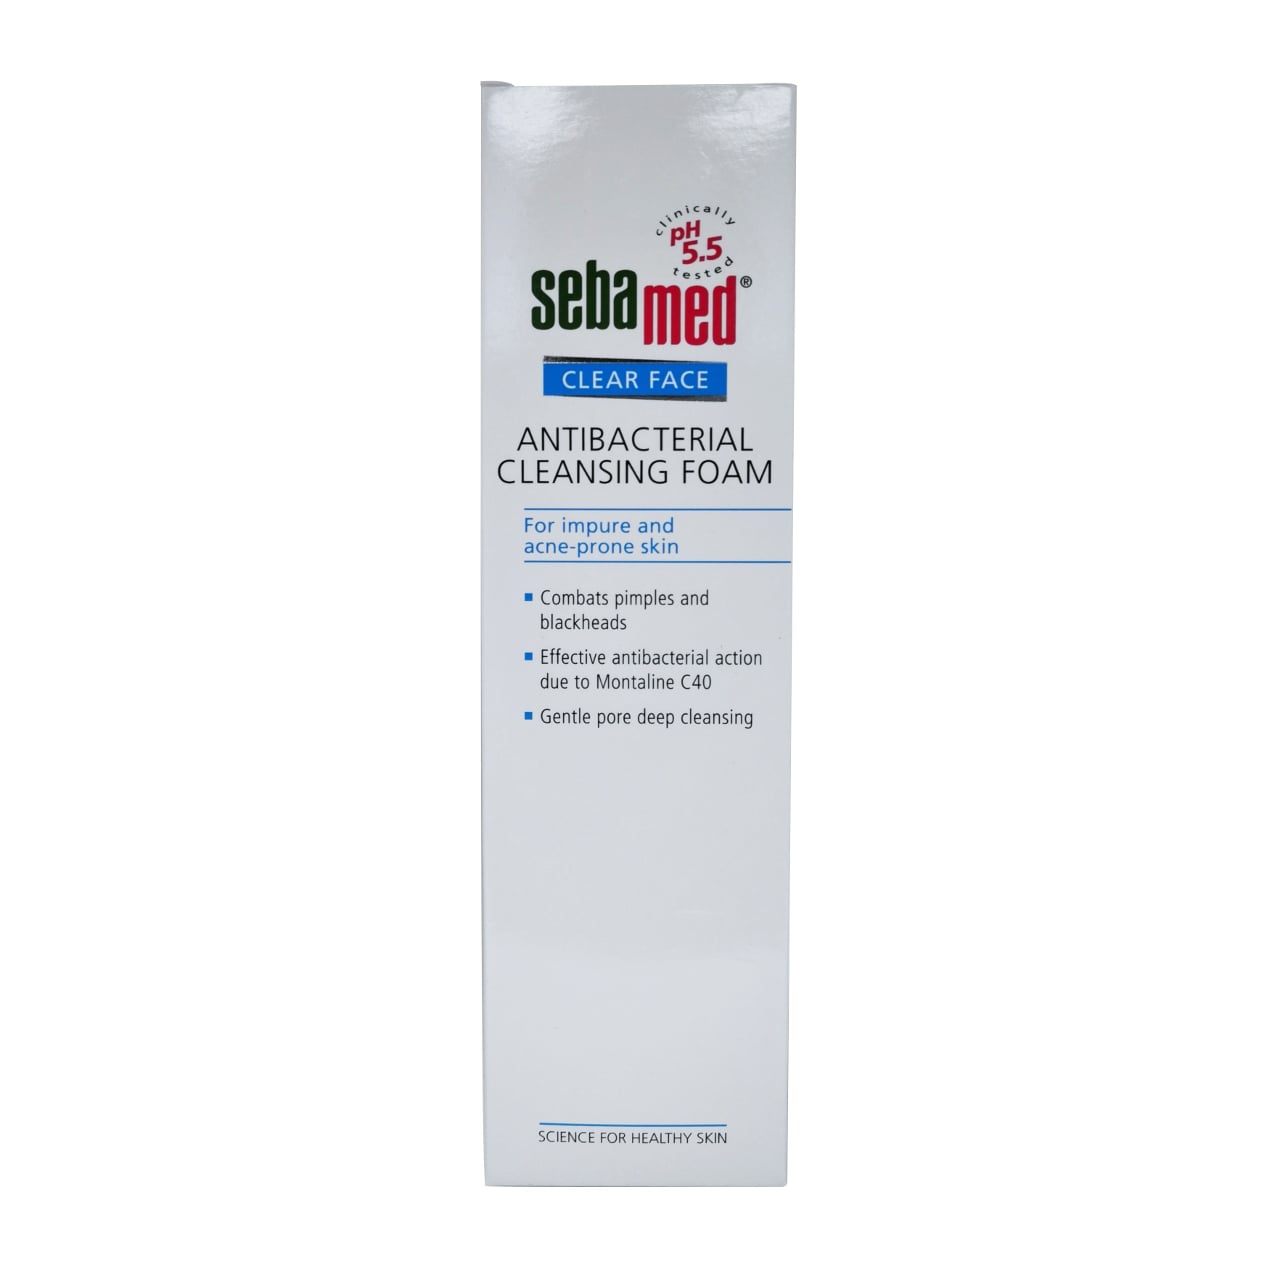 Product label for Sebamed Clear Face Antibacterial Cleansing Foam in English